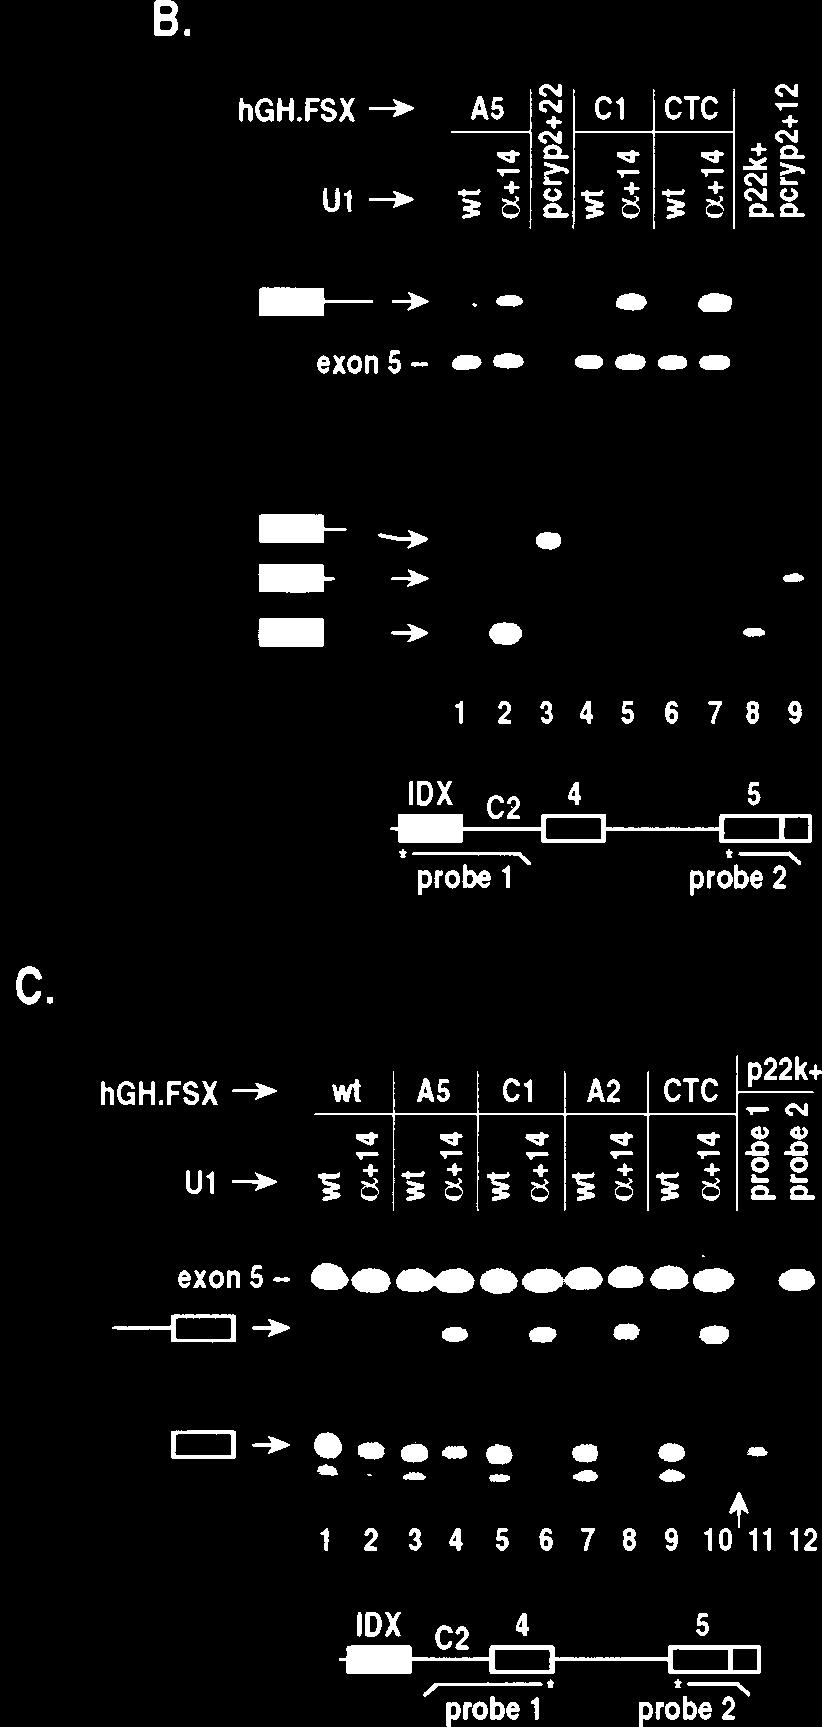 Above the schematic, the bands labeled exon 5 result from protection of probe 2 by reporter RNA, whereas the DNase bands result from protection of the same probe by DNase^E5 RNA (control lanes not